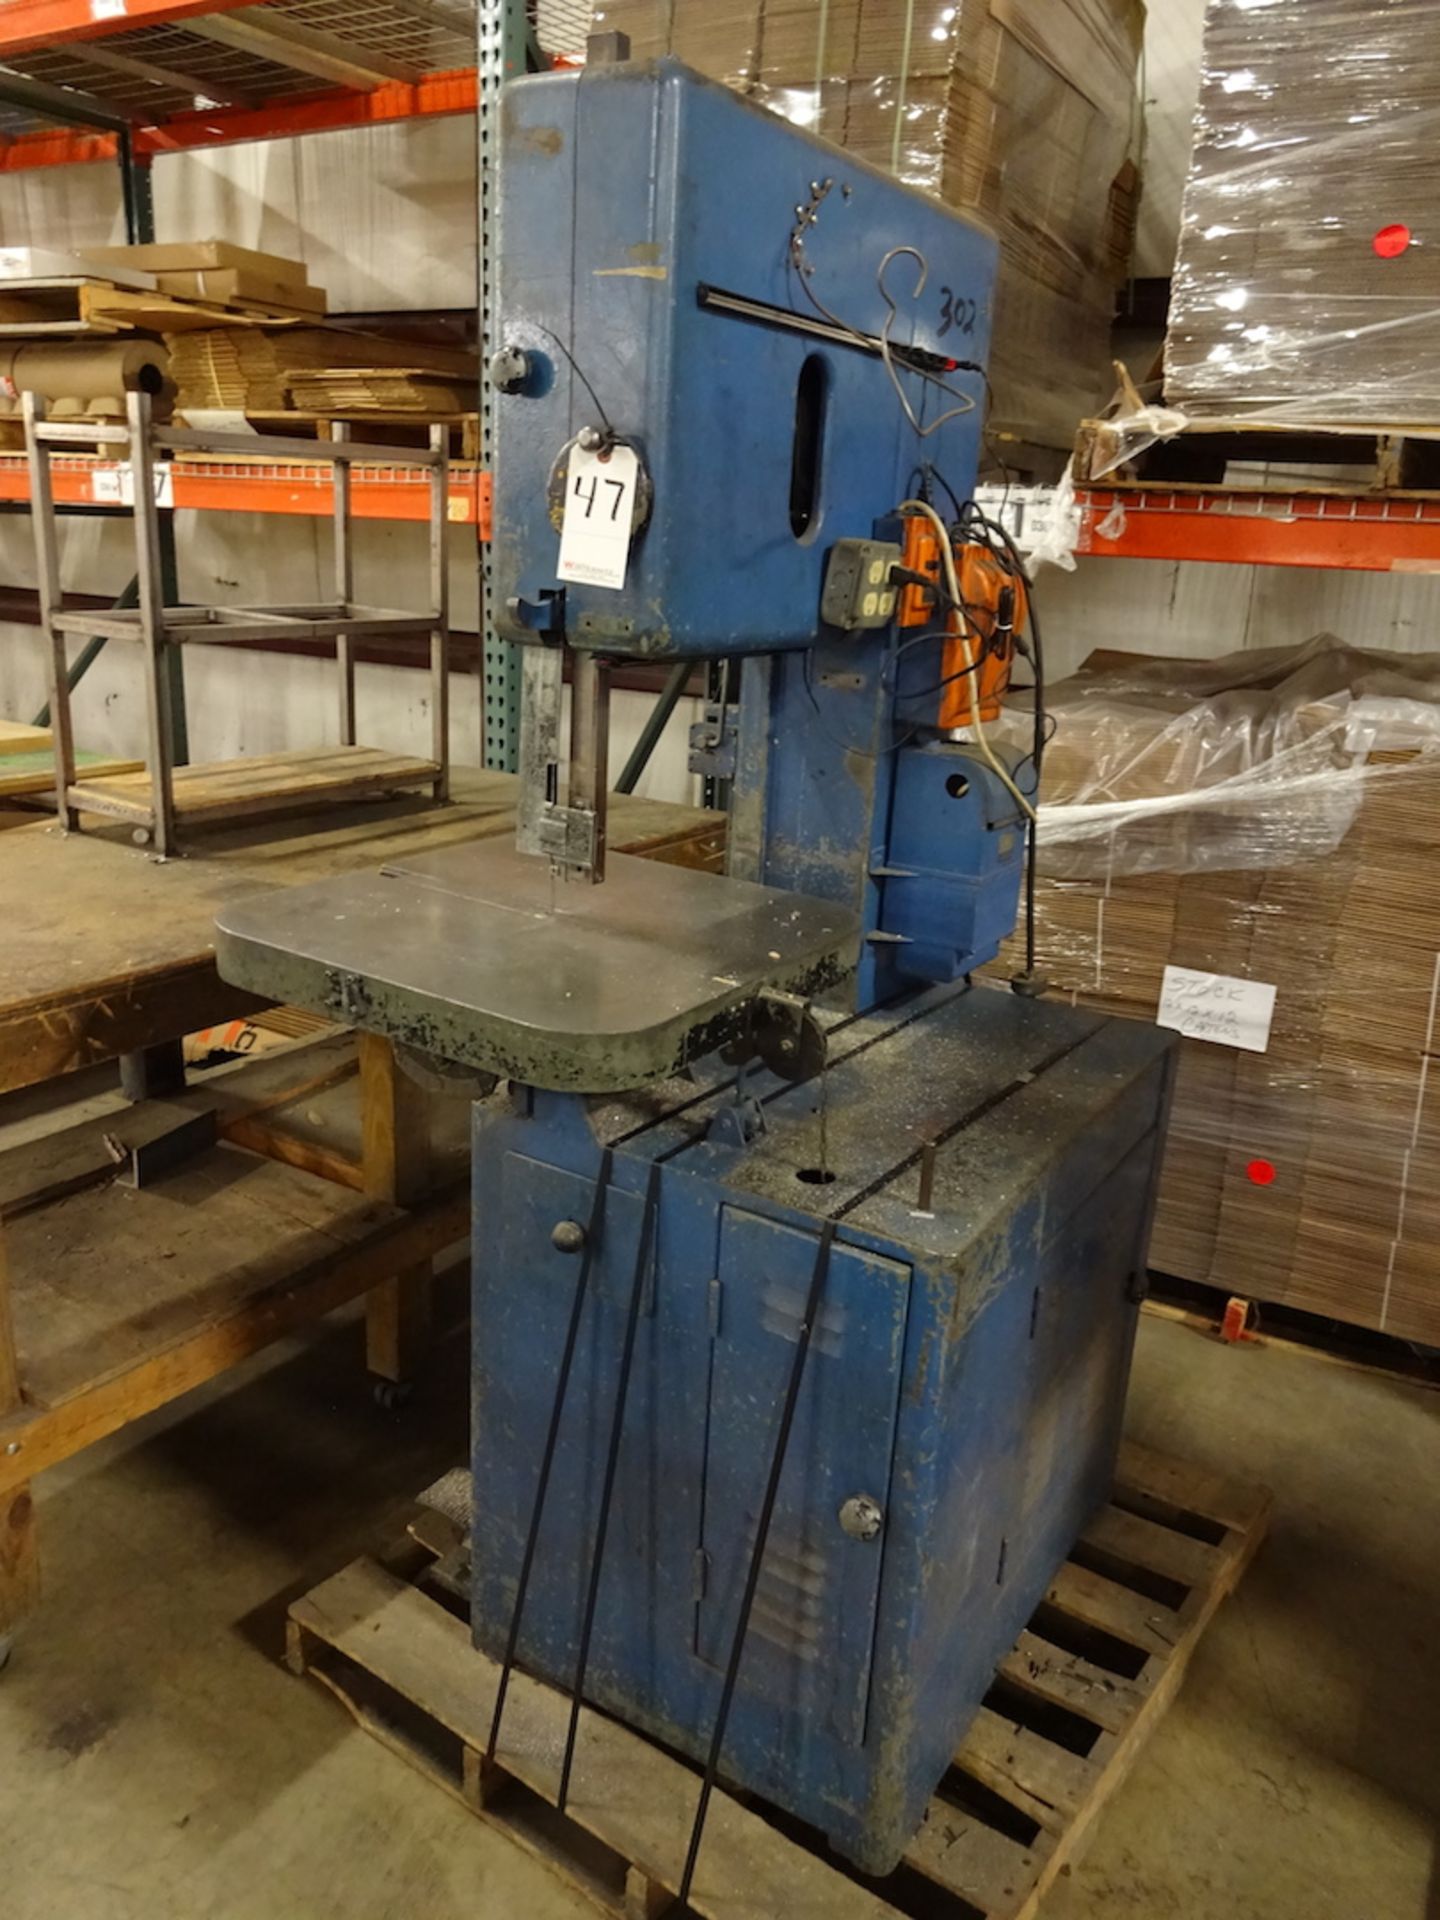 Grob 18 in. Model NS-18 Vertical Band Saw, S/N 9965